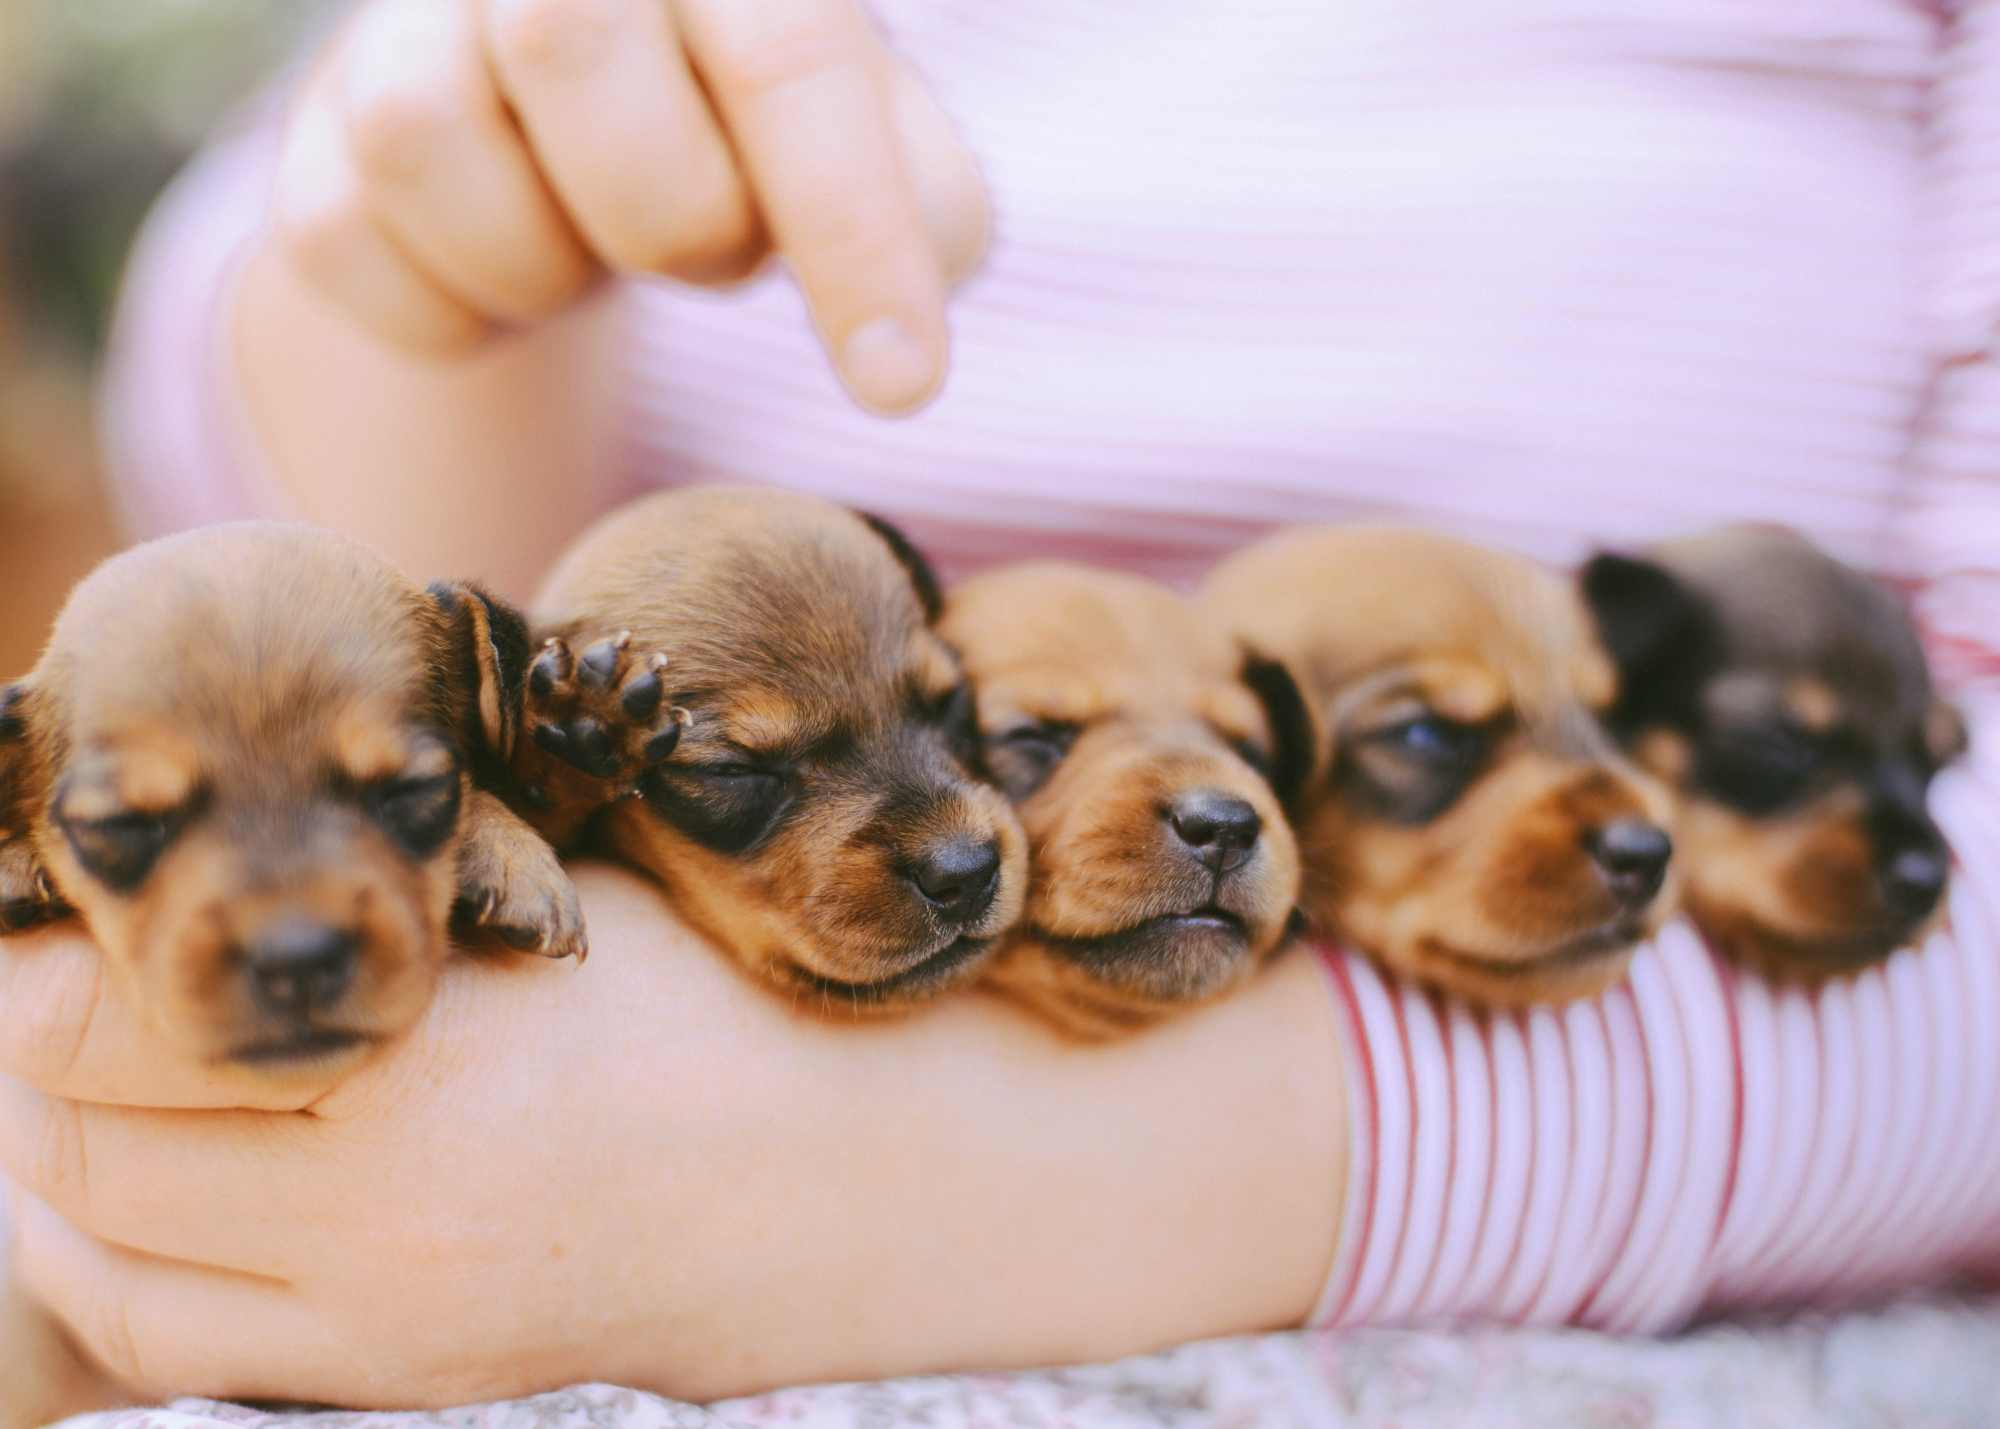 a woman wearing a pink shirt holds 5 mini dachshund puppies arranged in a row